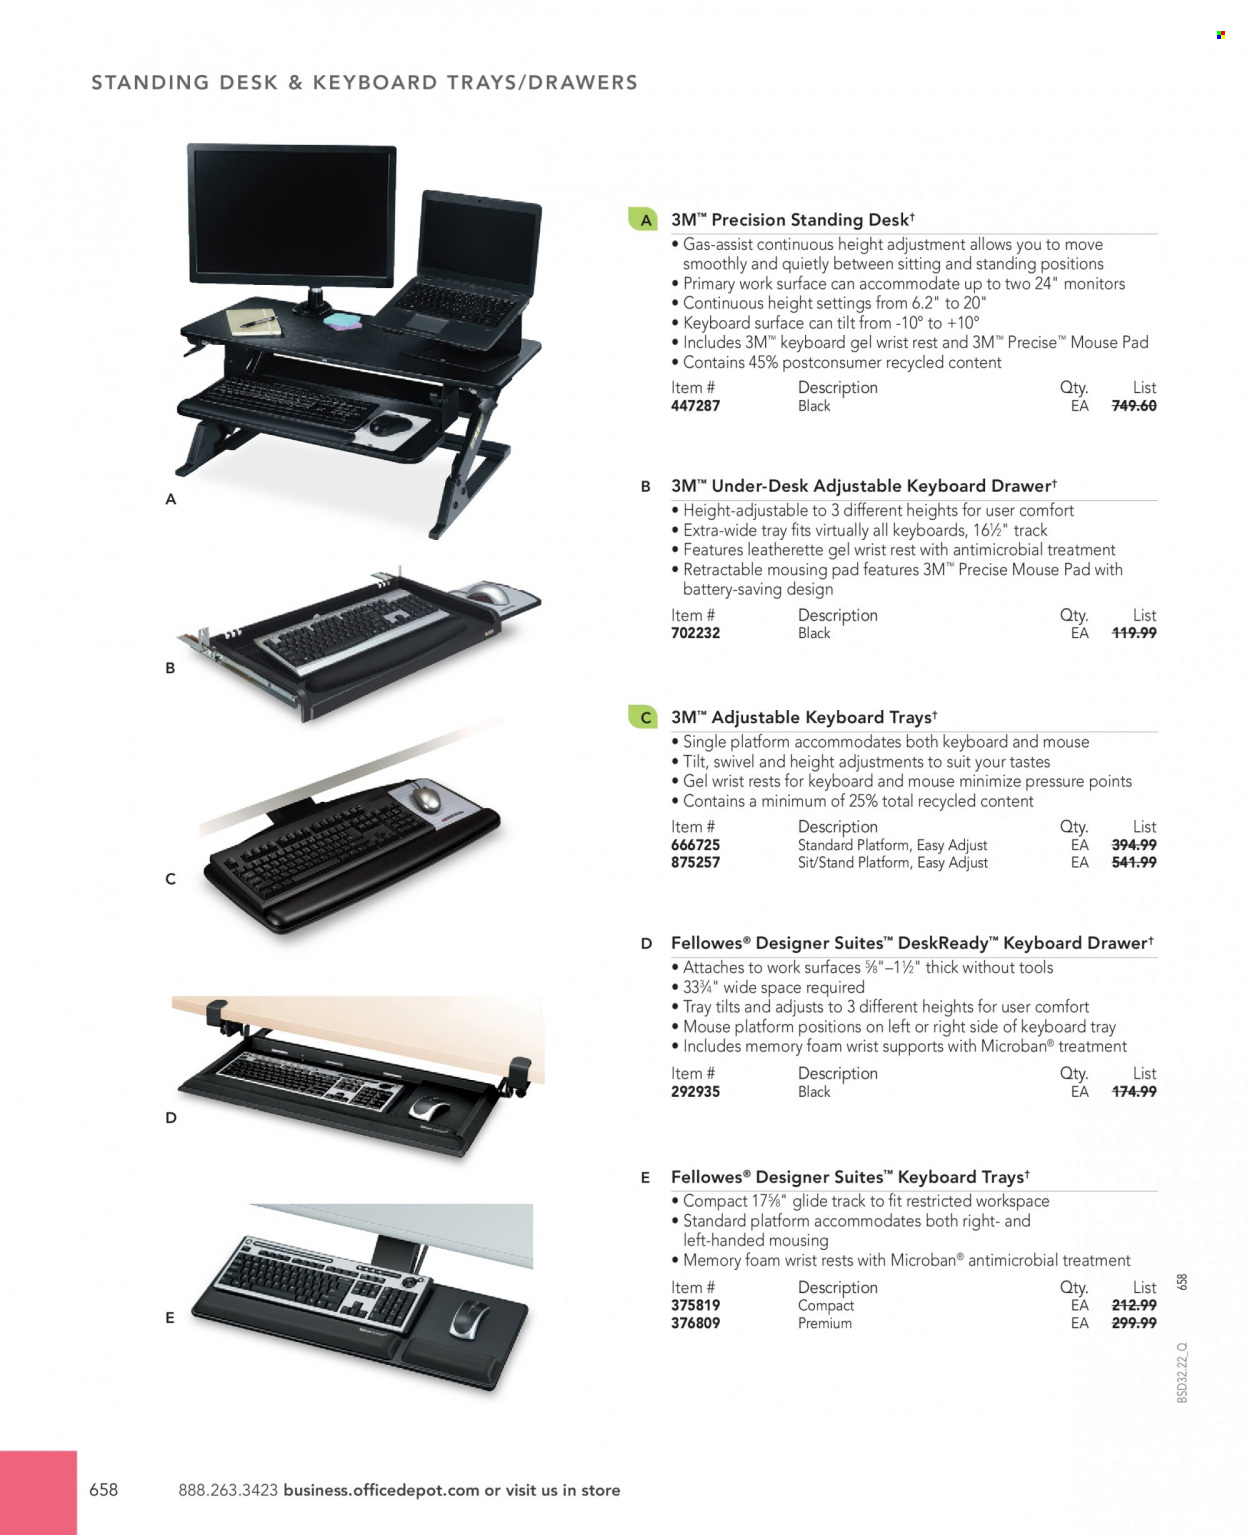 thumbnail - Office DEPOT Flyer - Sales products - mouse, keyboard, mouse pad, standing desk, desk. Page 658.